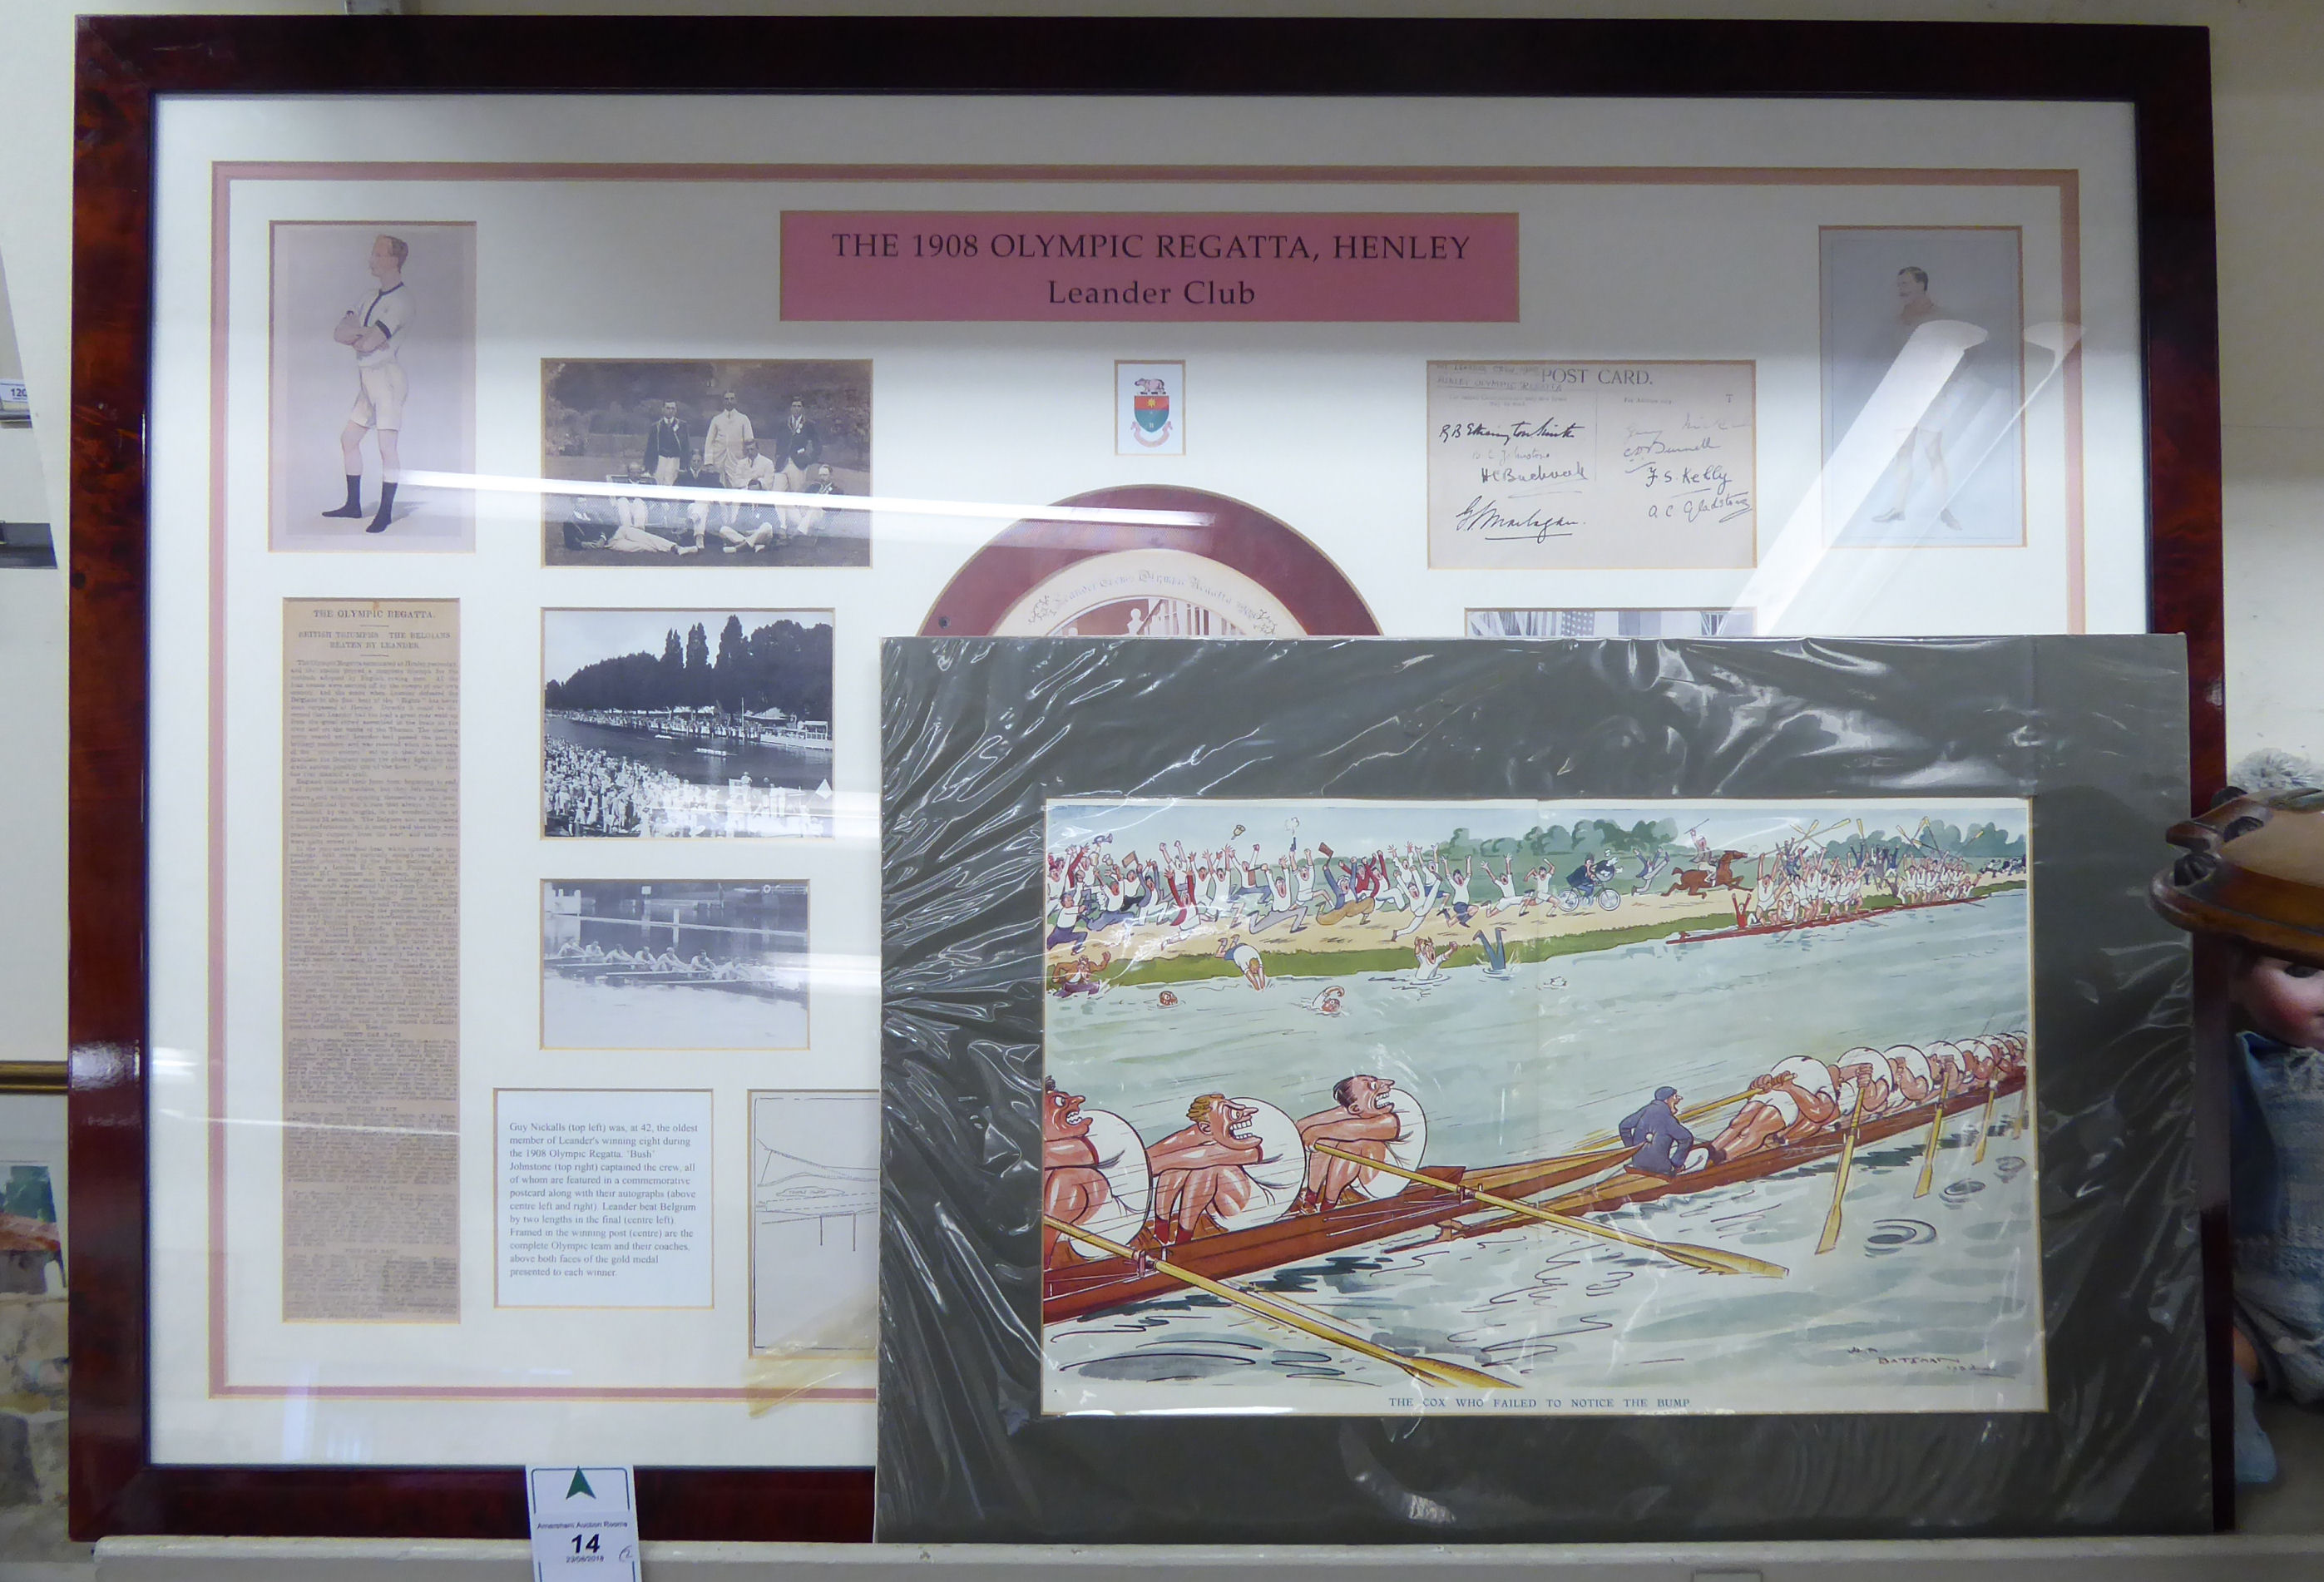 A Limited Edition collage 45/1000, featuring the 1908 Olympic Regatta,